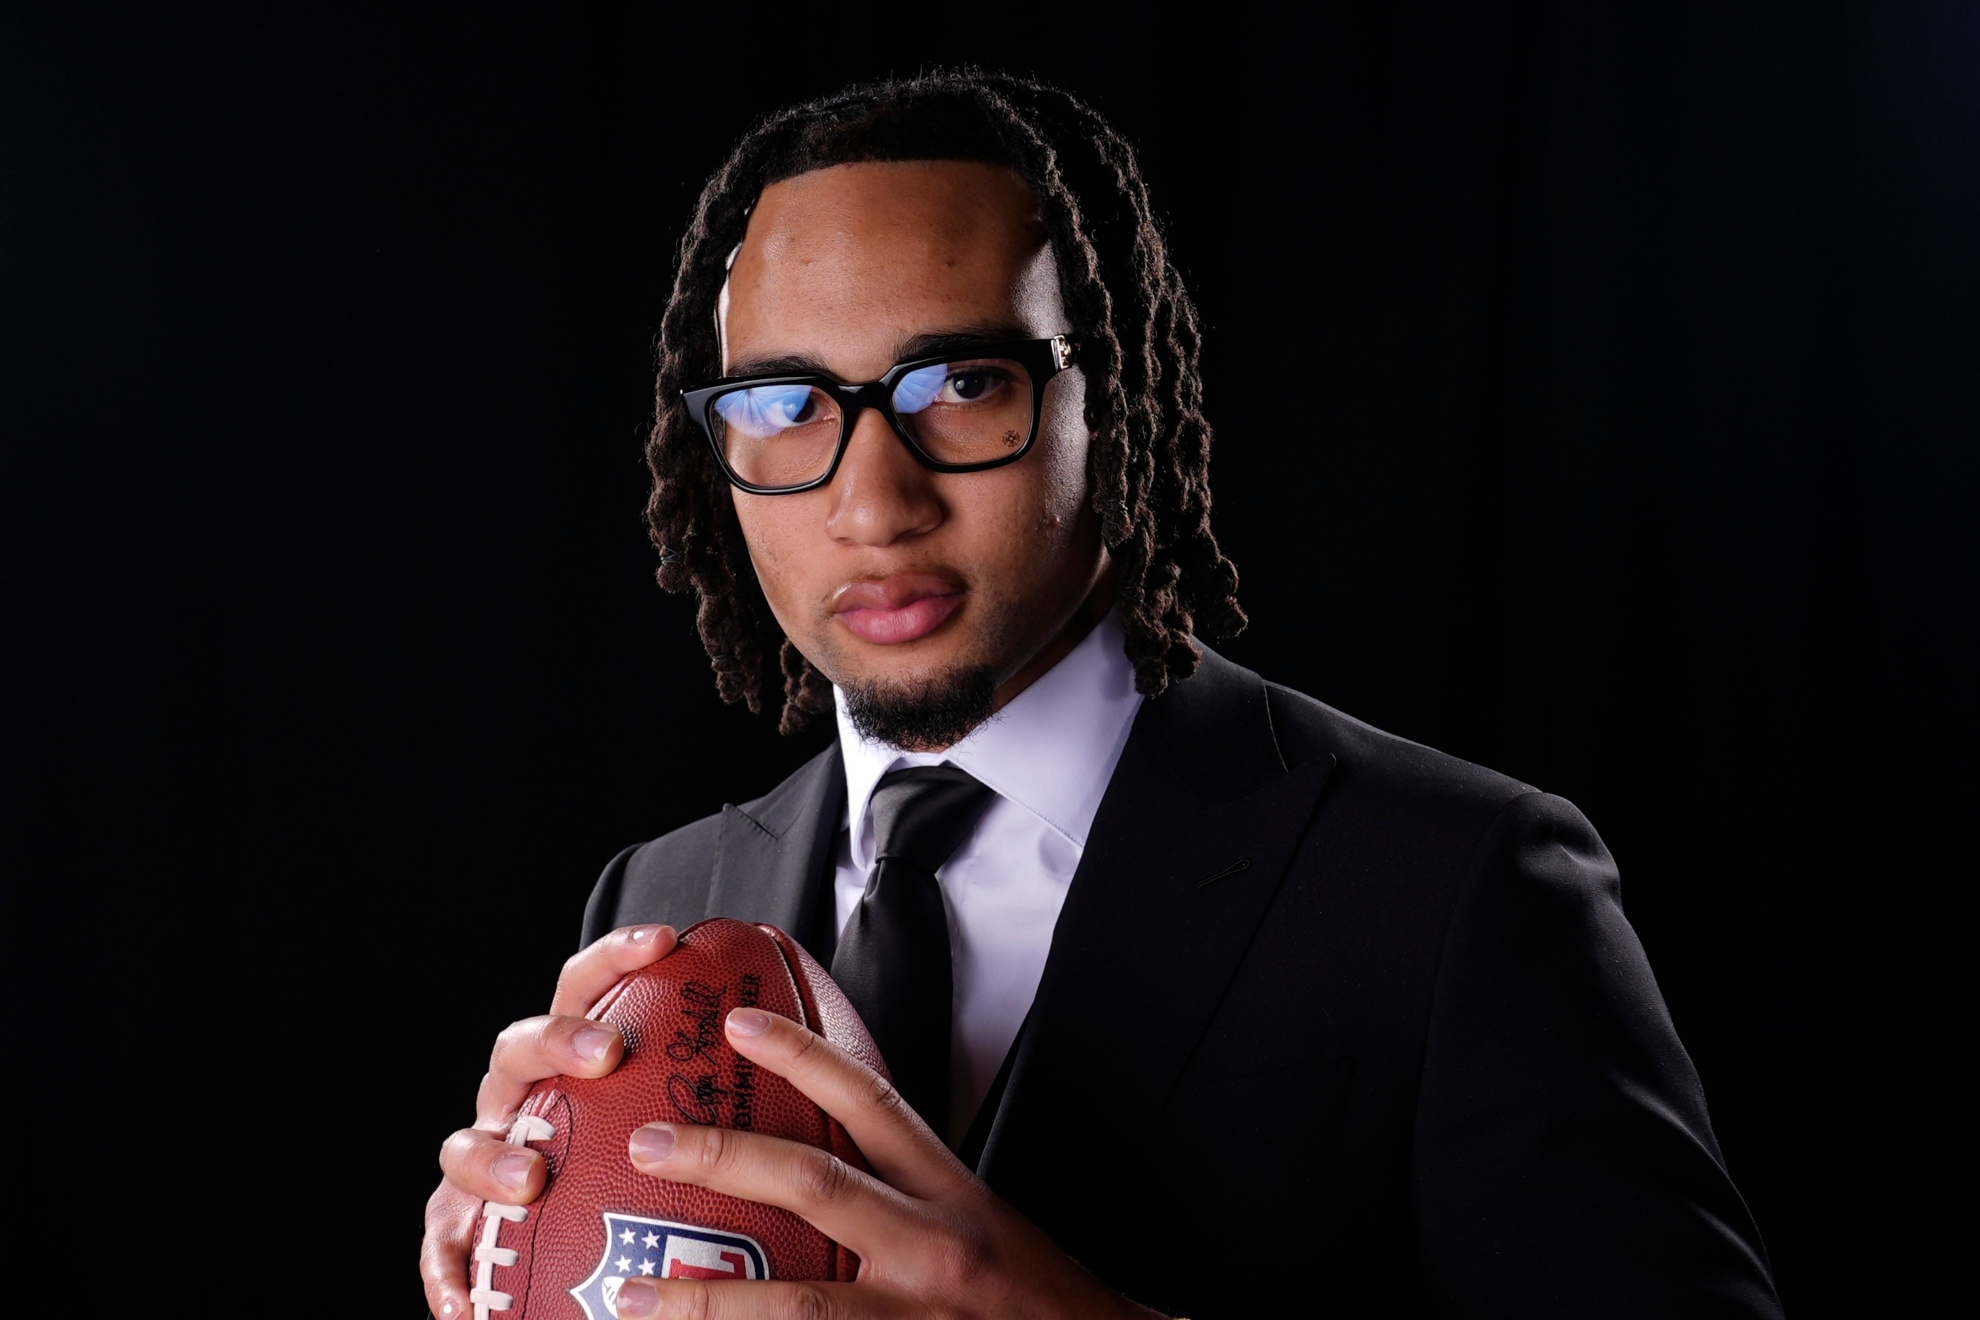 CJ Stroud vouches for Marvin Harrison Jr. as a top NFL Draft pick